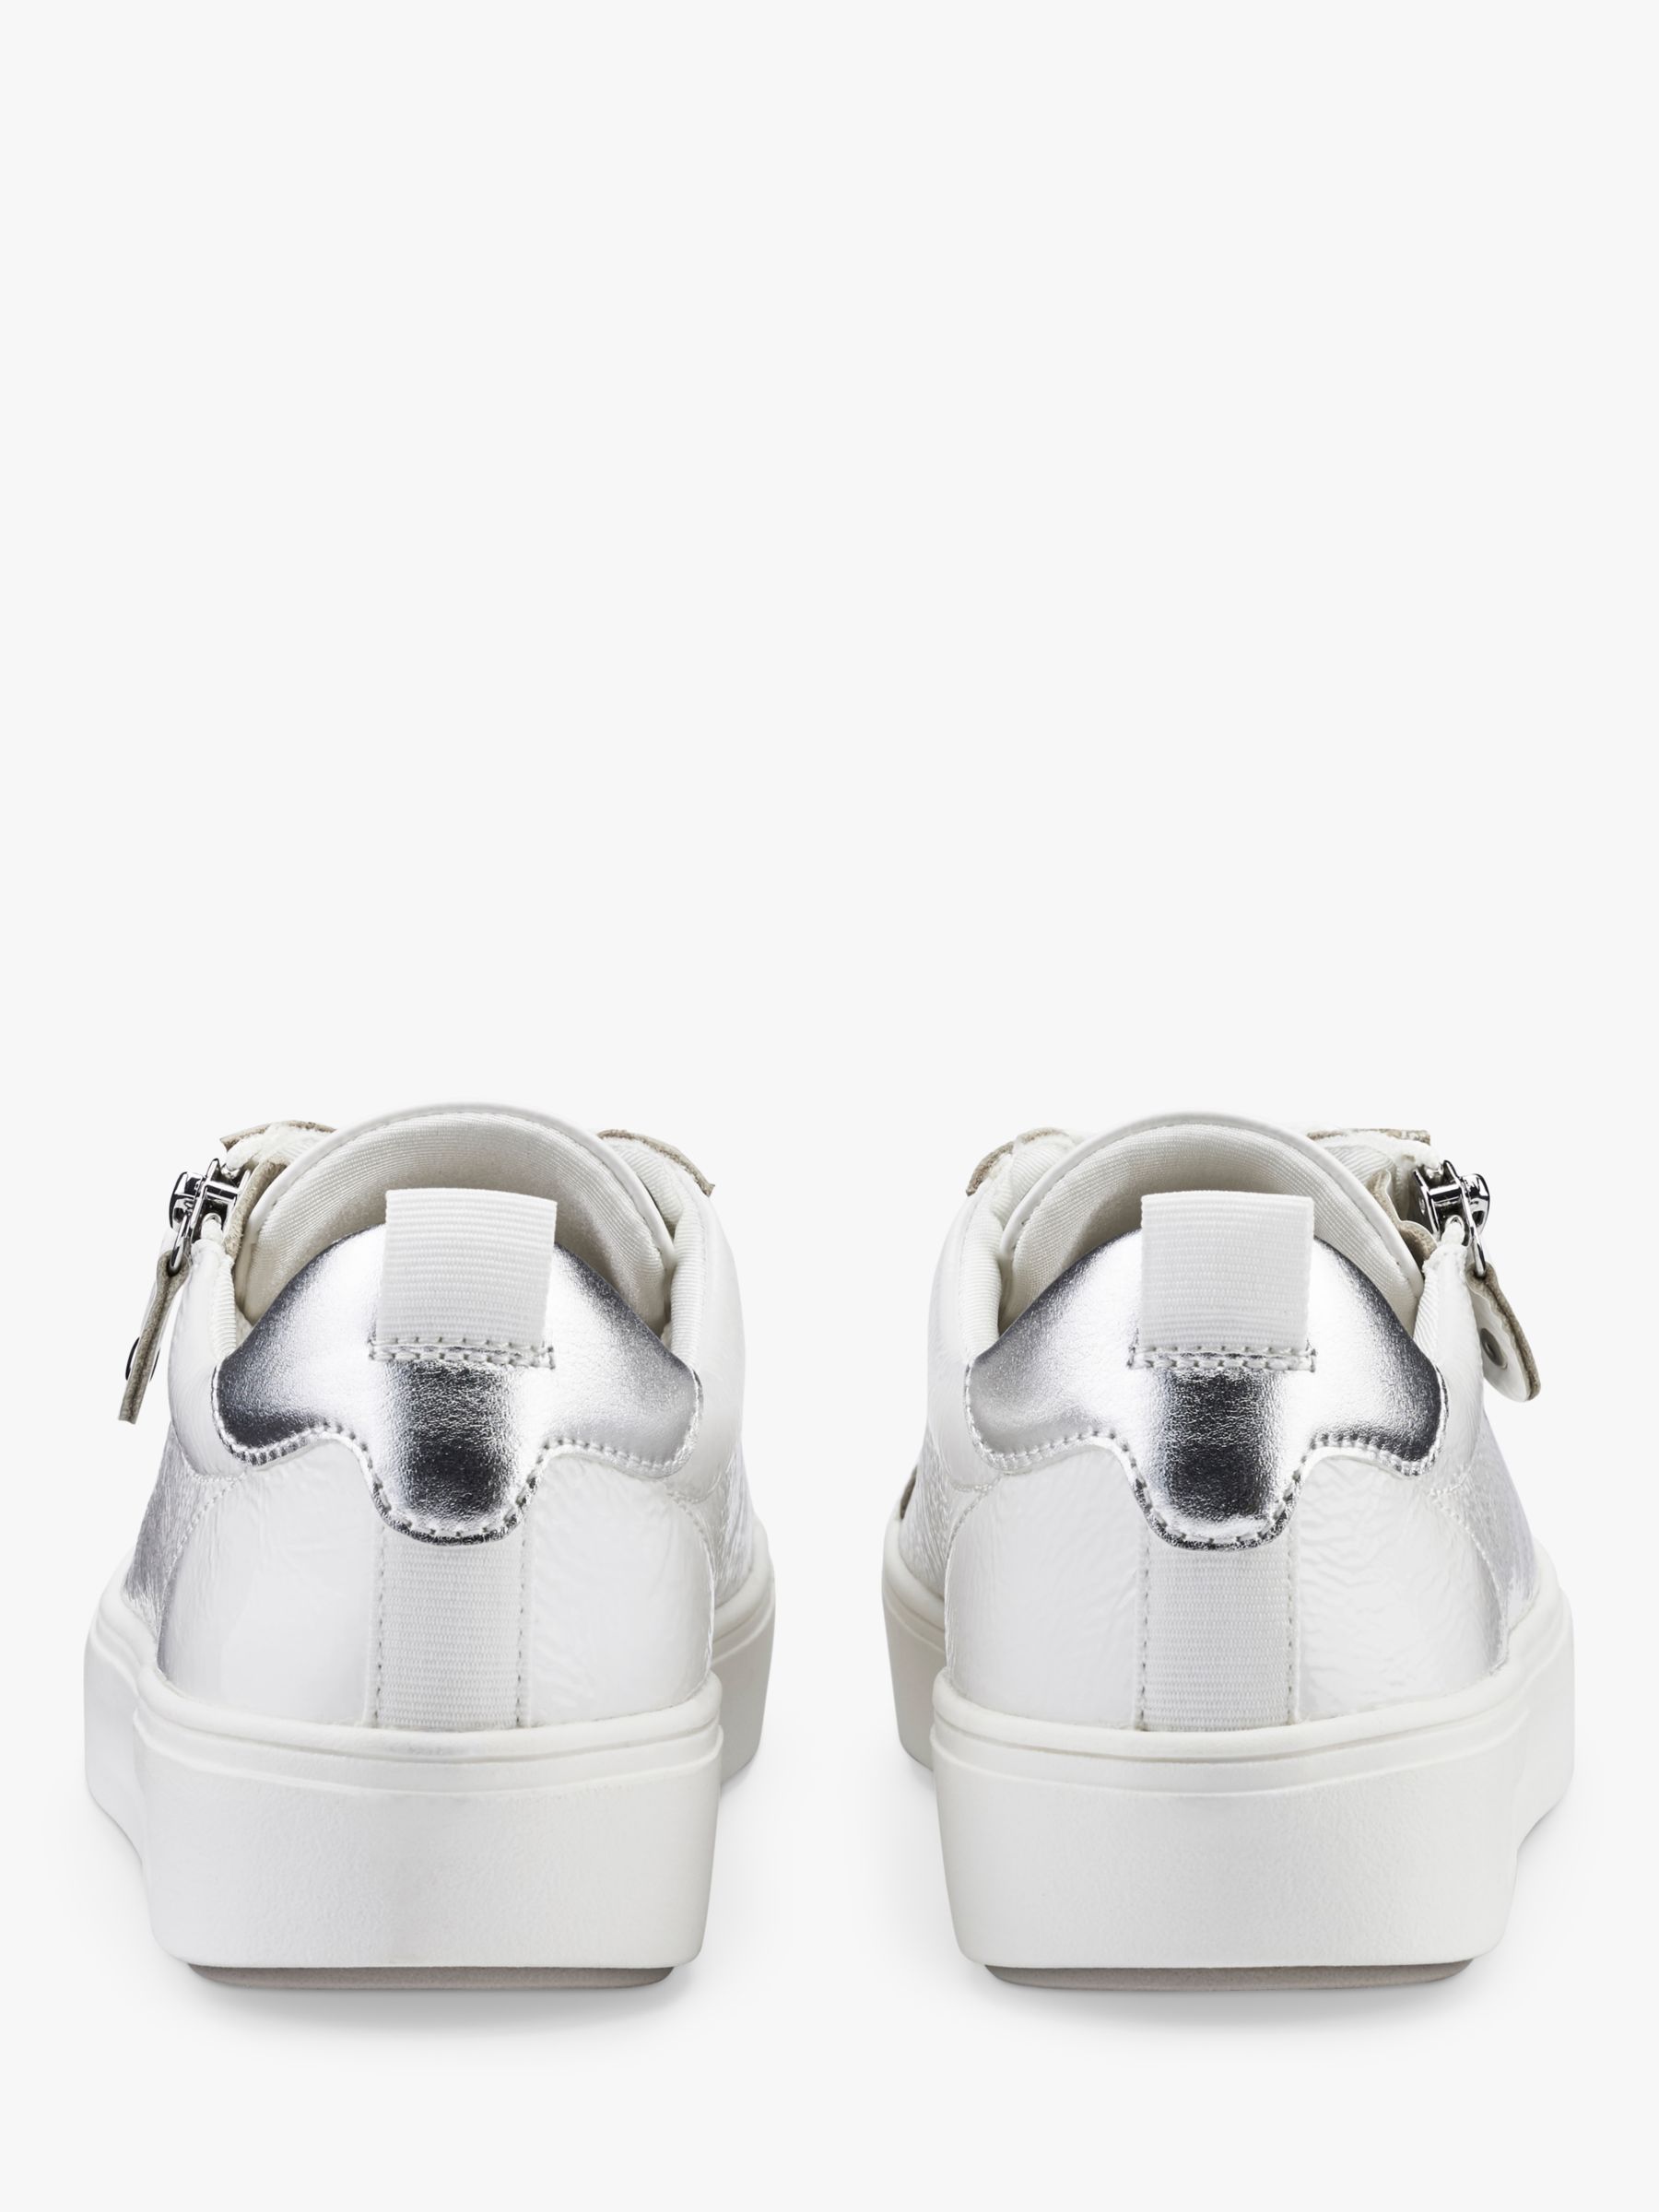 Buy Hotter Cupid Leather Zip and Go Trainers, White Online at johnlewis.com